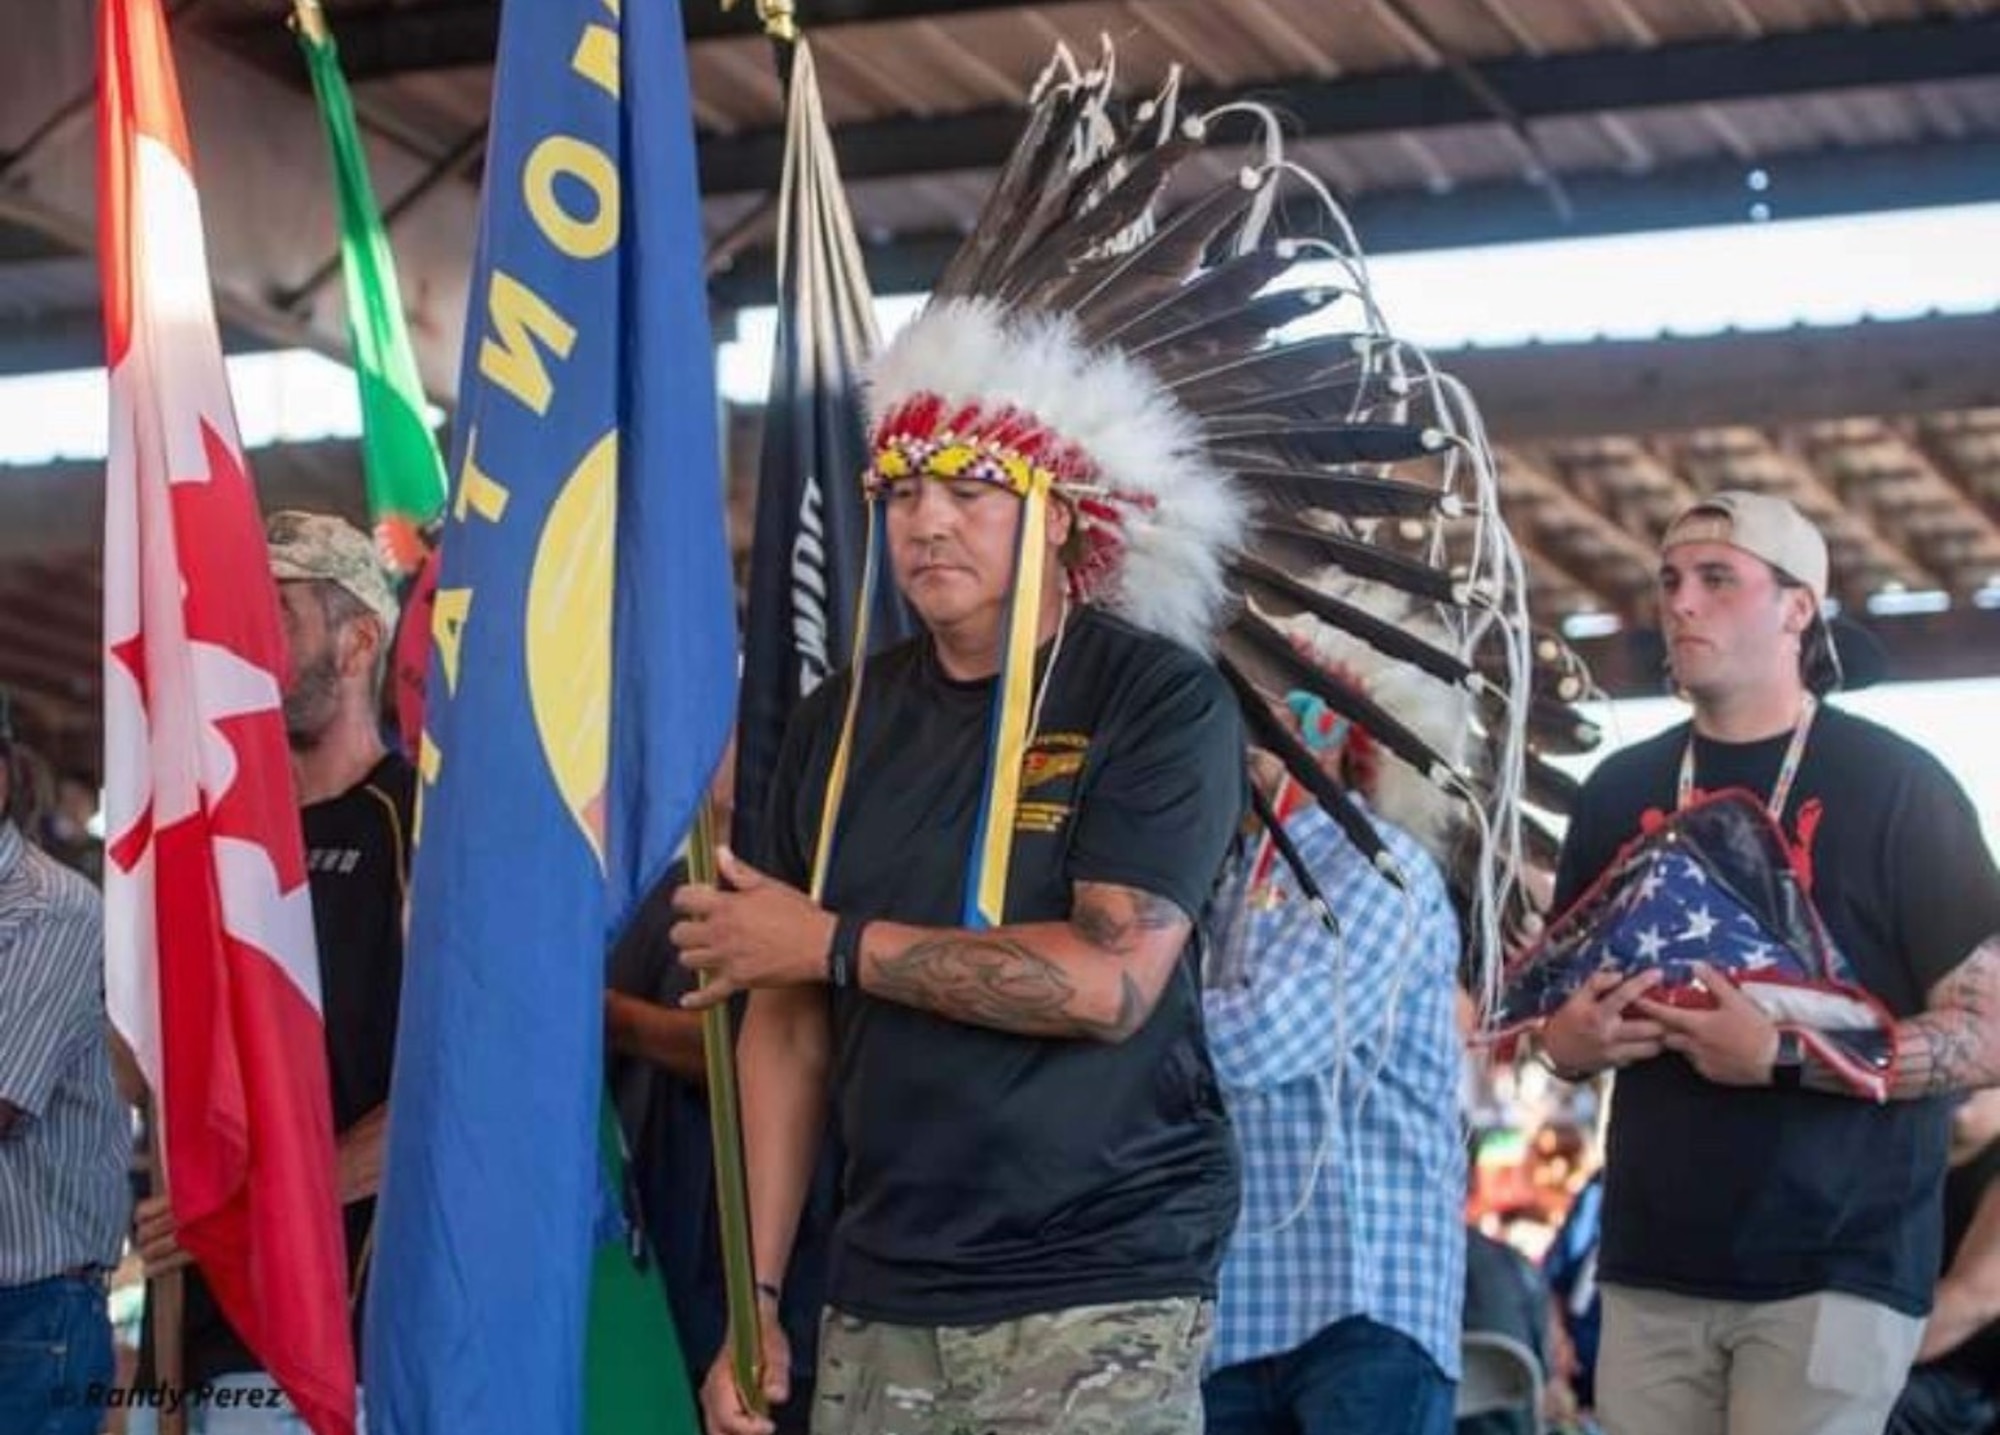 A man wearing a feathered headress holds the Montana state flag and marches towards the left side of the photo.